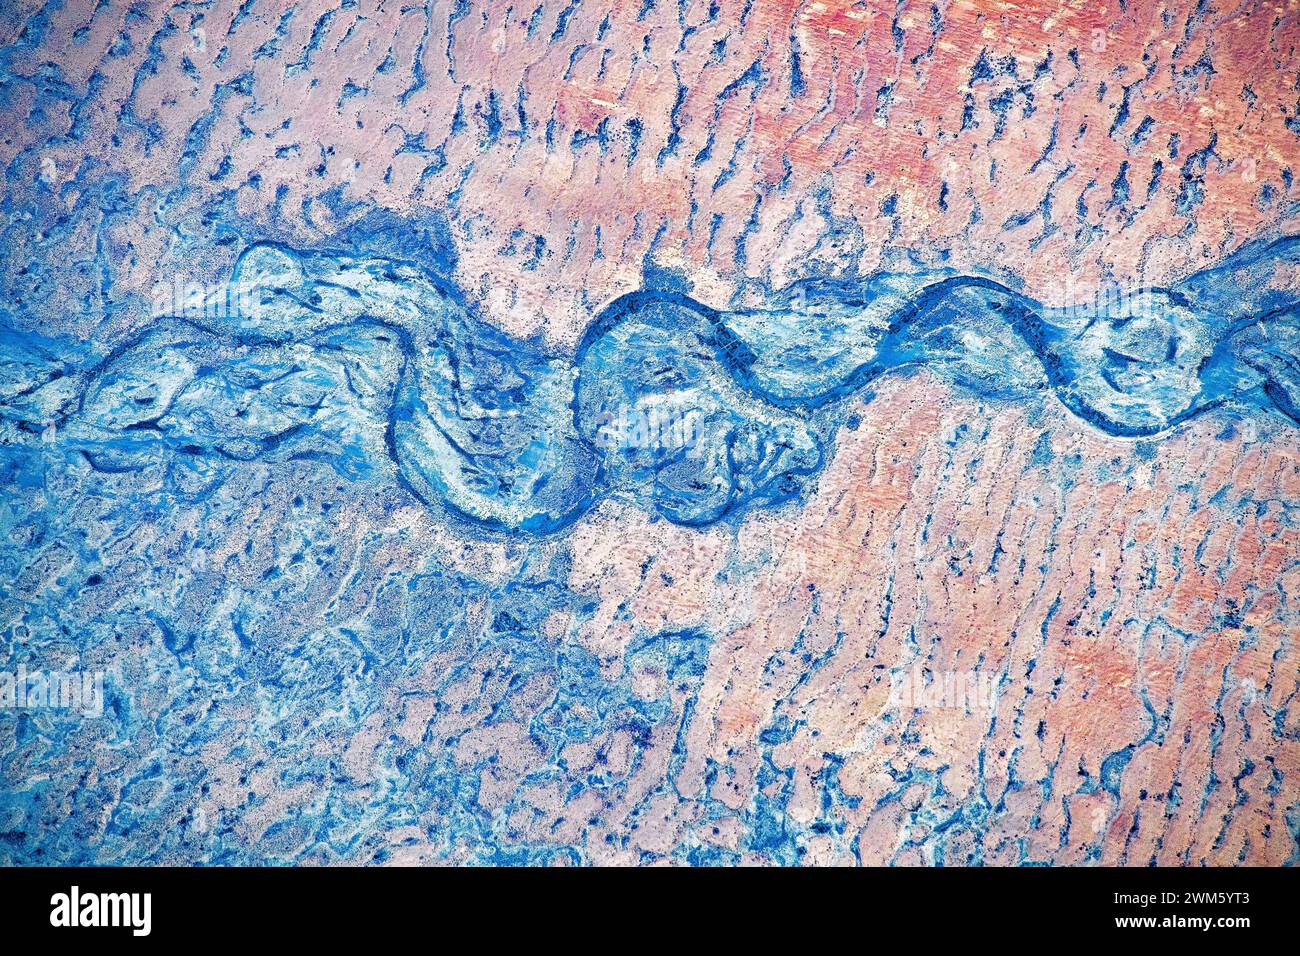 Land feature close to Chaddra, Chad. Digital enhancement of an image by NASA Stock Photo